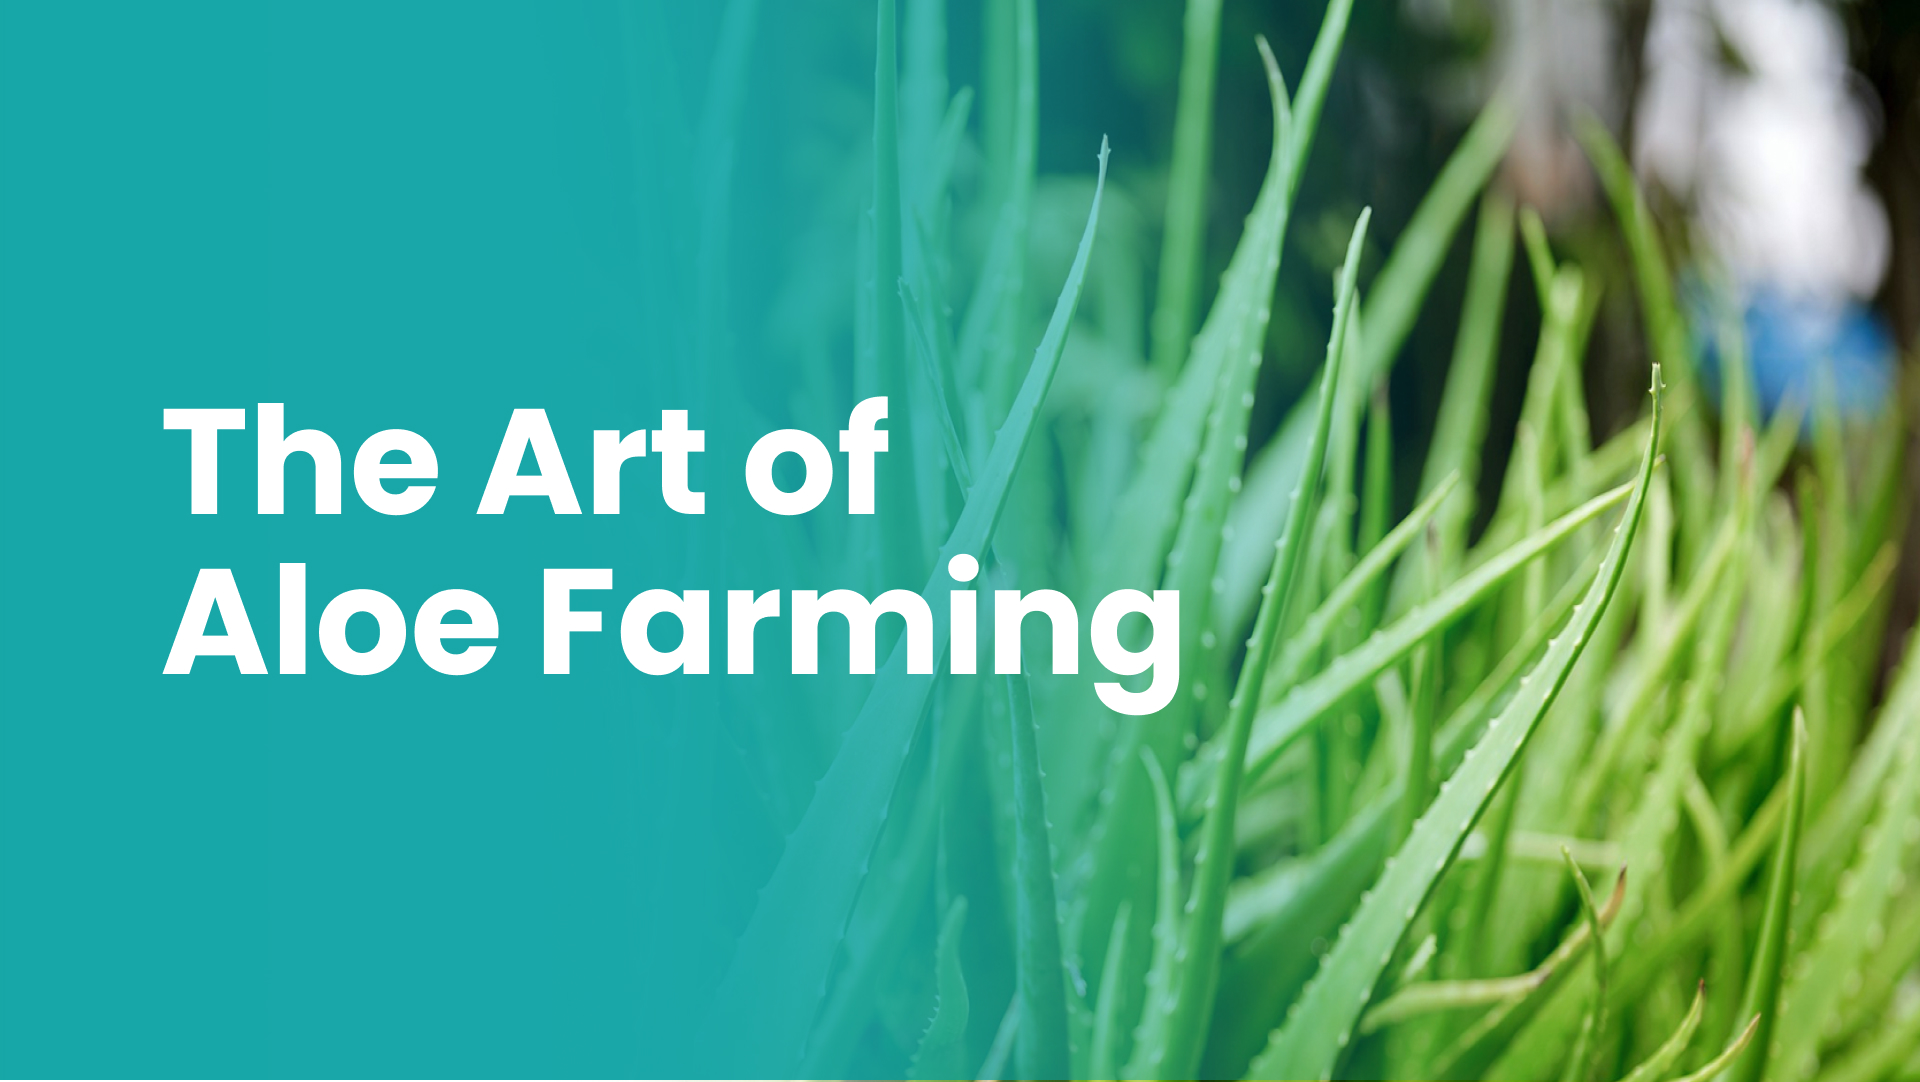 Course Trailer: Agripreneurship: Aloe Vera Farming & Value Addition -Earn 20 Lakh/year. Watch to know more.